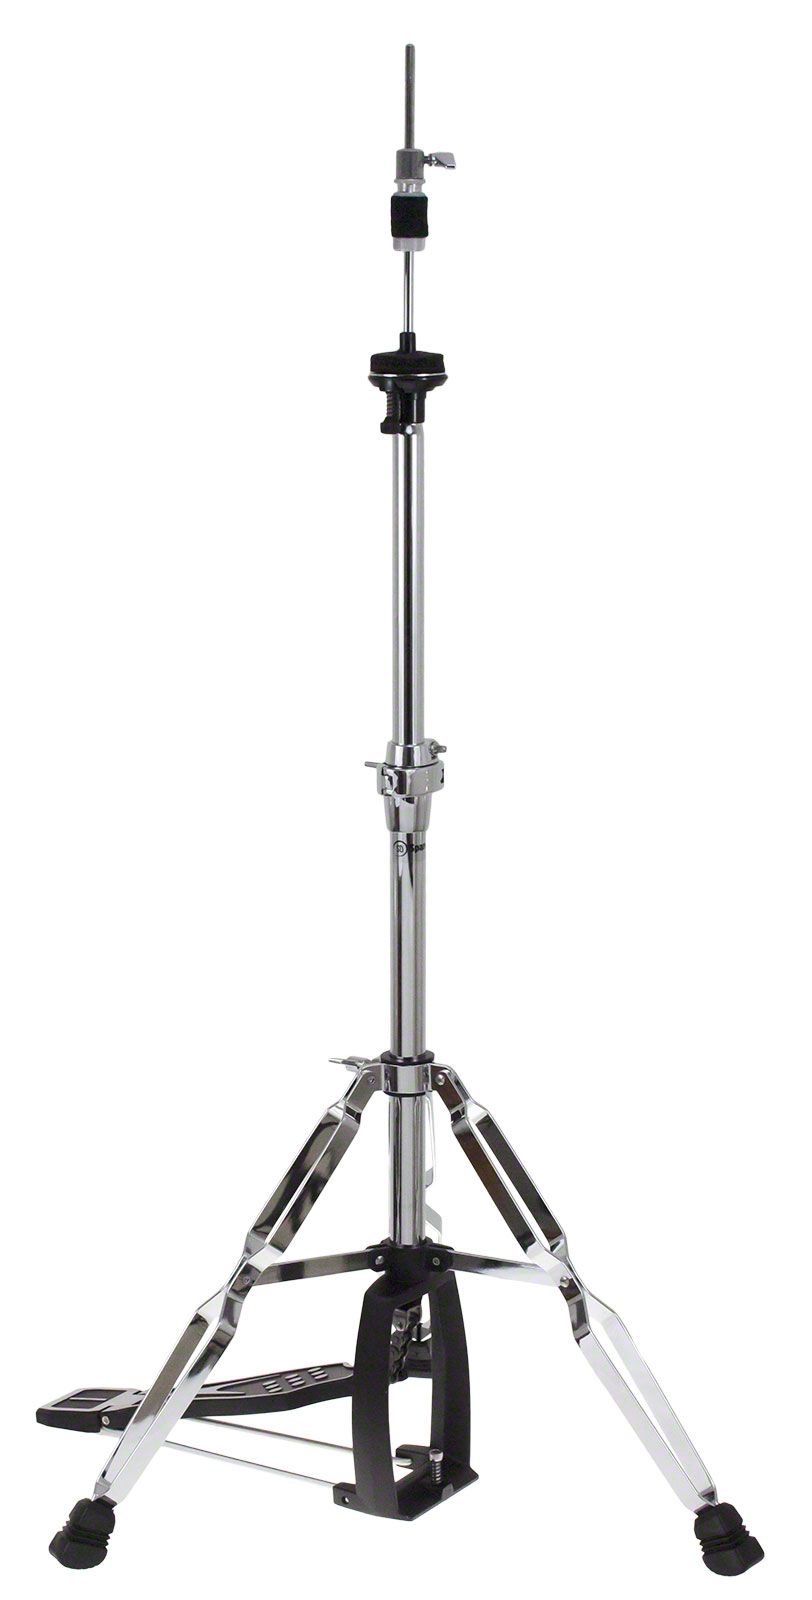 SPAREDRUM HHHS1 - HI-HAT STAND DOUBLE-BRACED LEGS